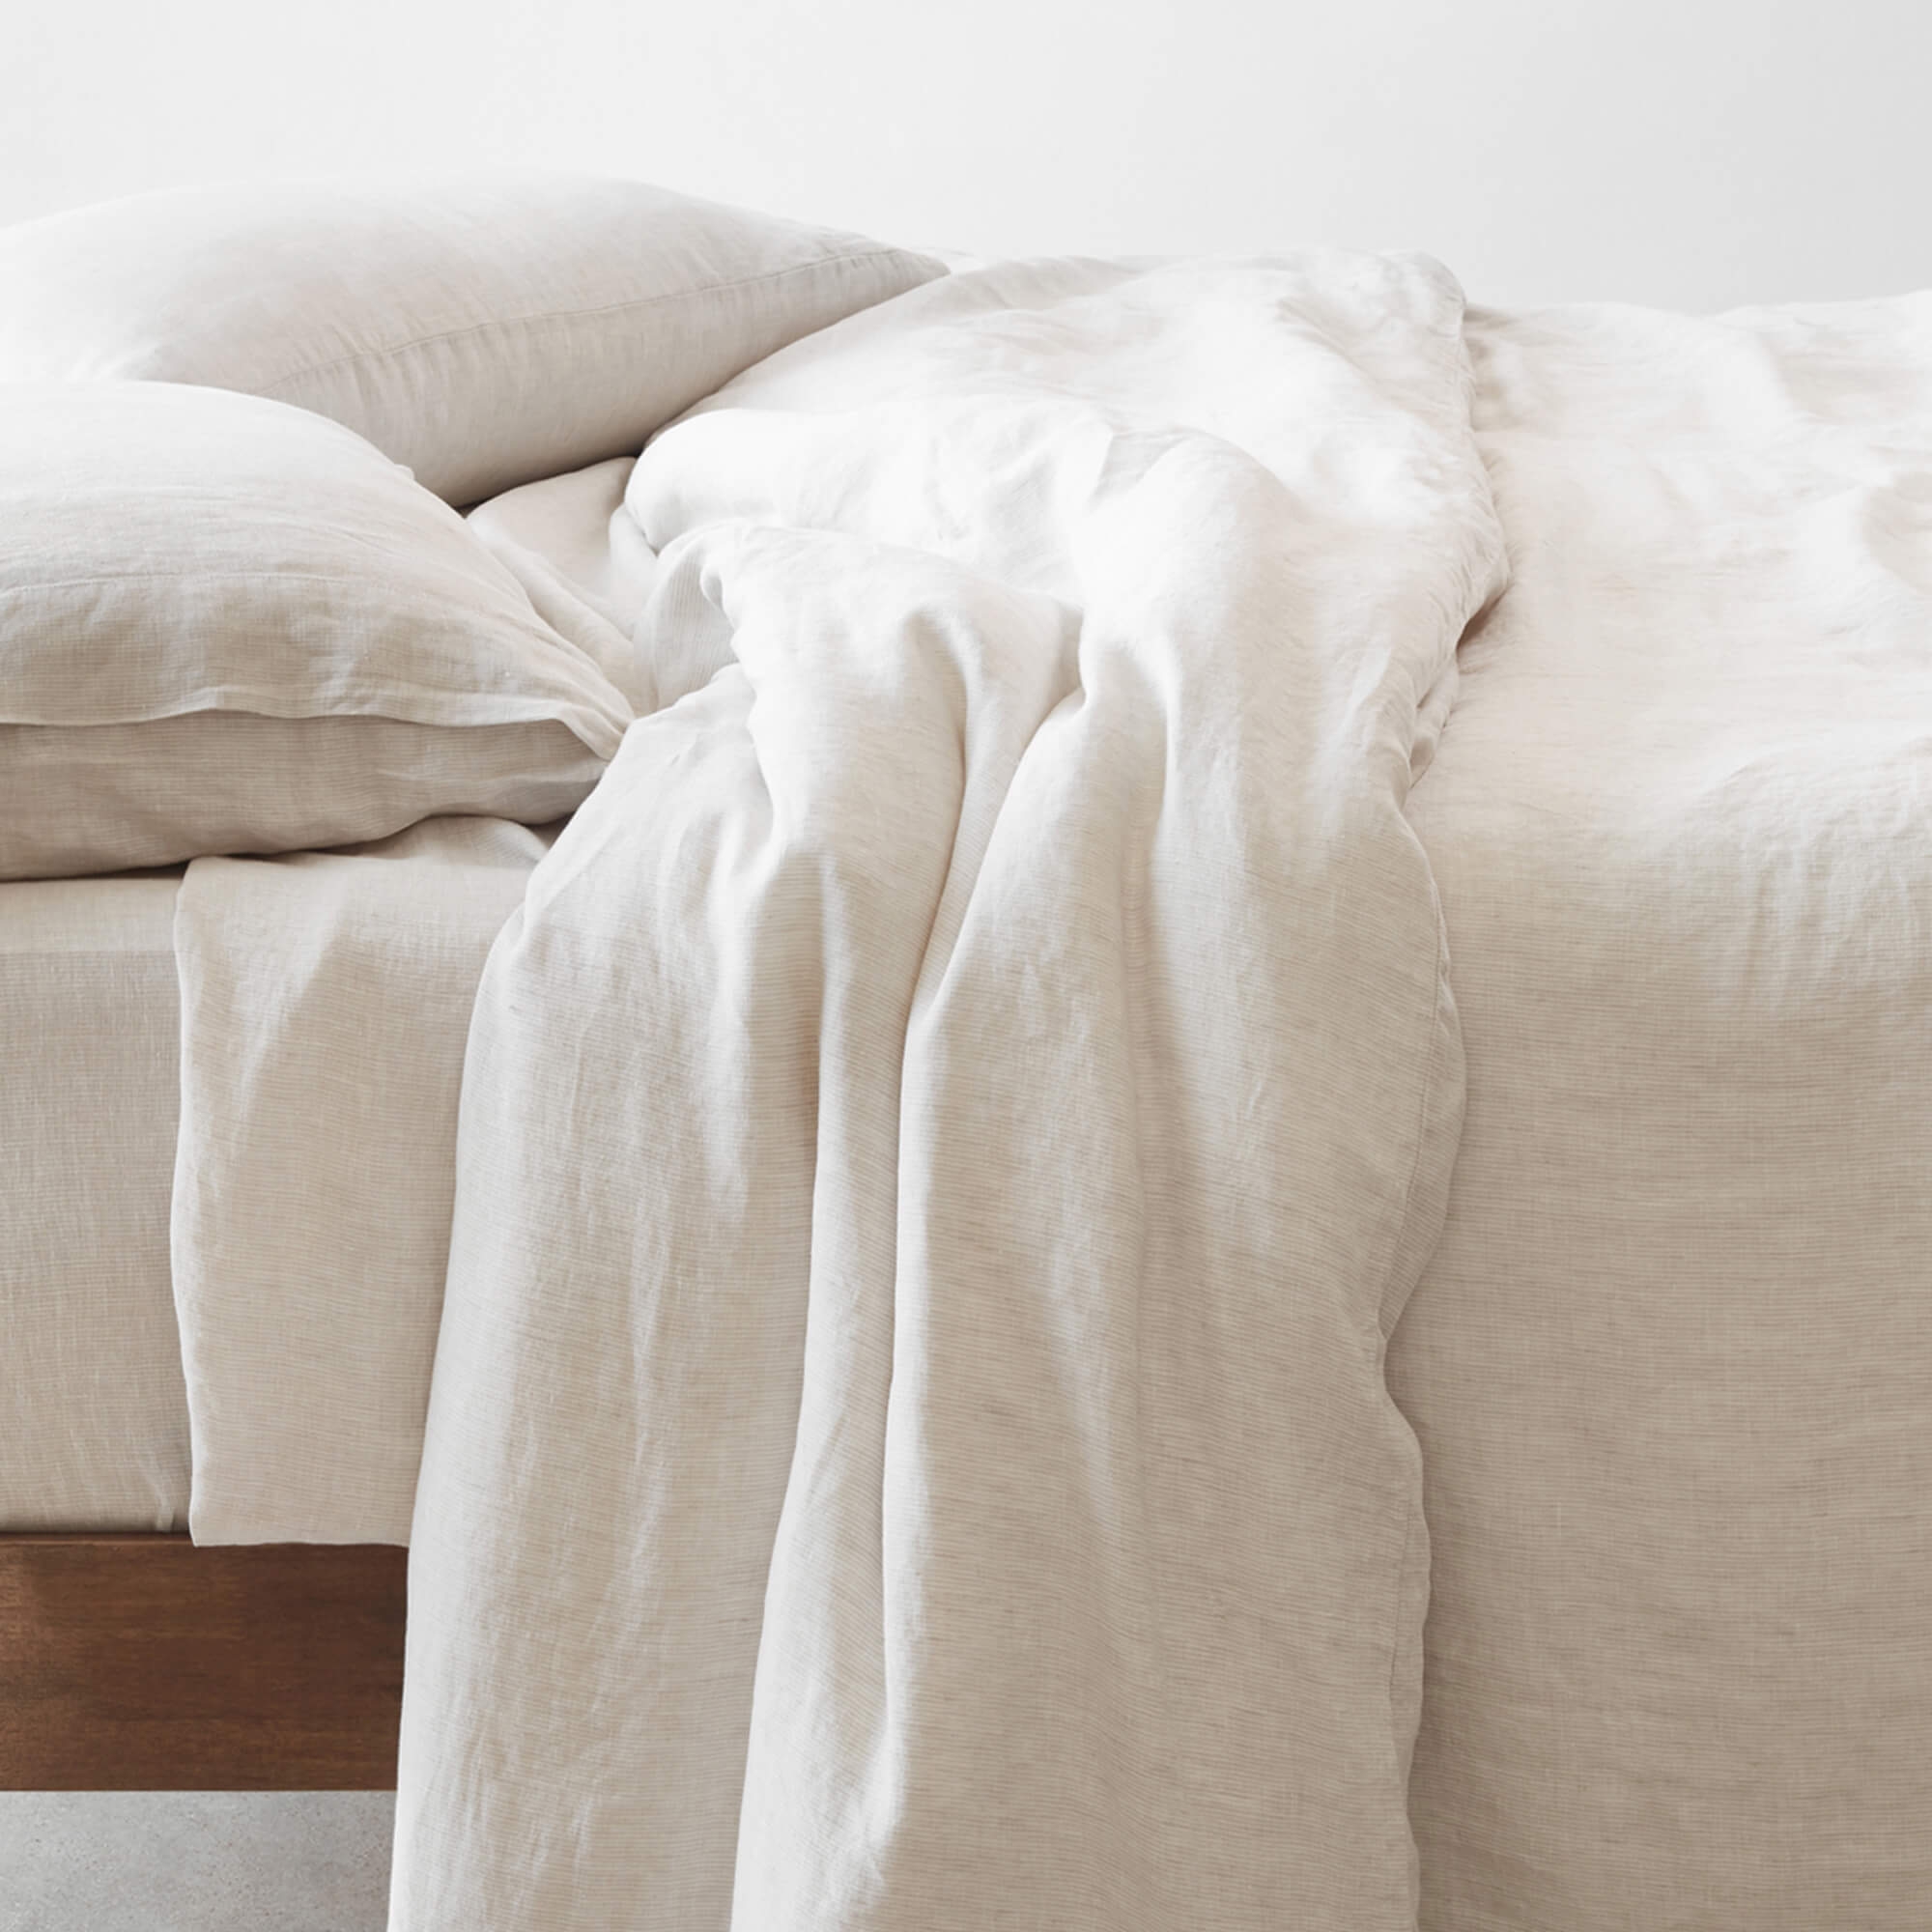 The Citizenry Stonewashed Linen Duvet Cover | Full/Queen | Duvet Only | Indigo Chambray - Image 8